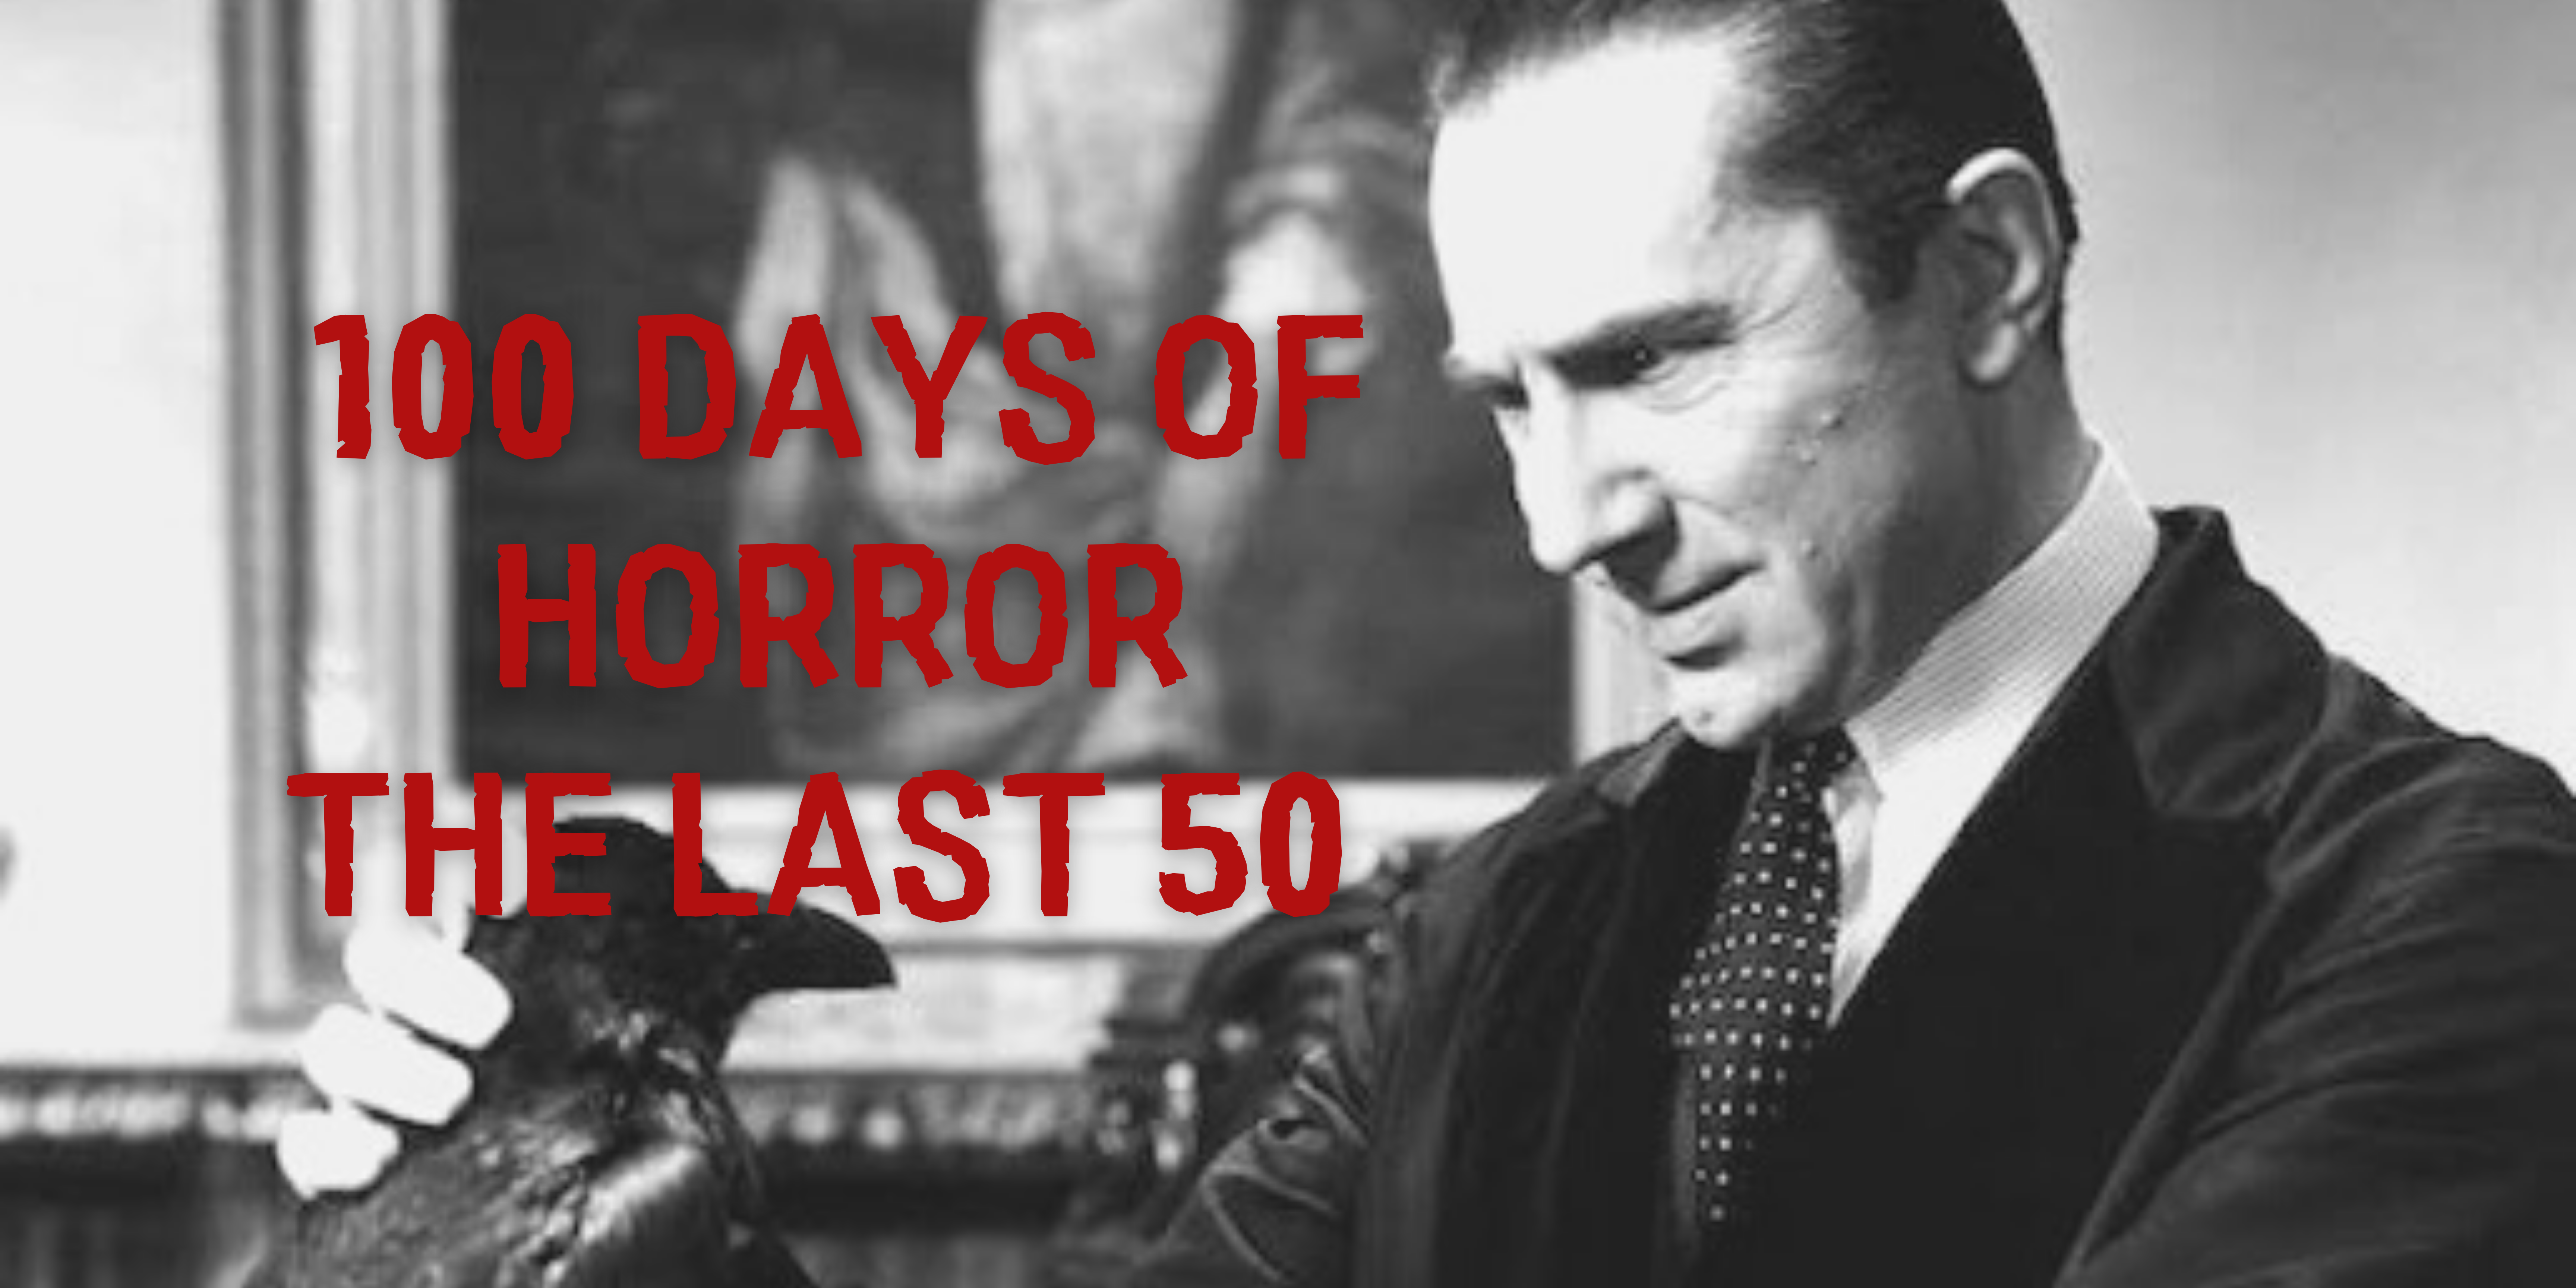 100 DAYS OF HORROR THE LAST 50 picture